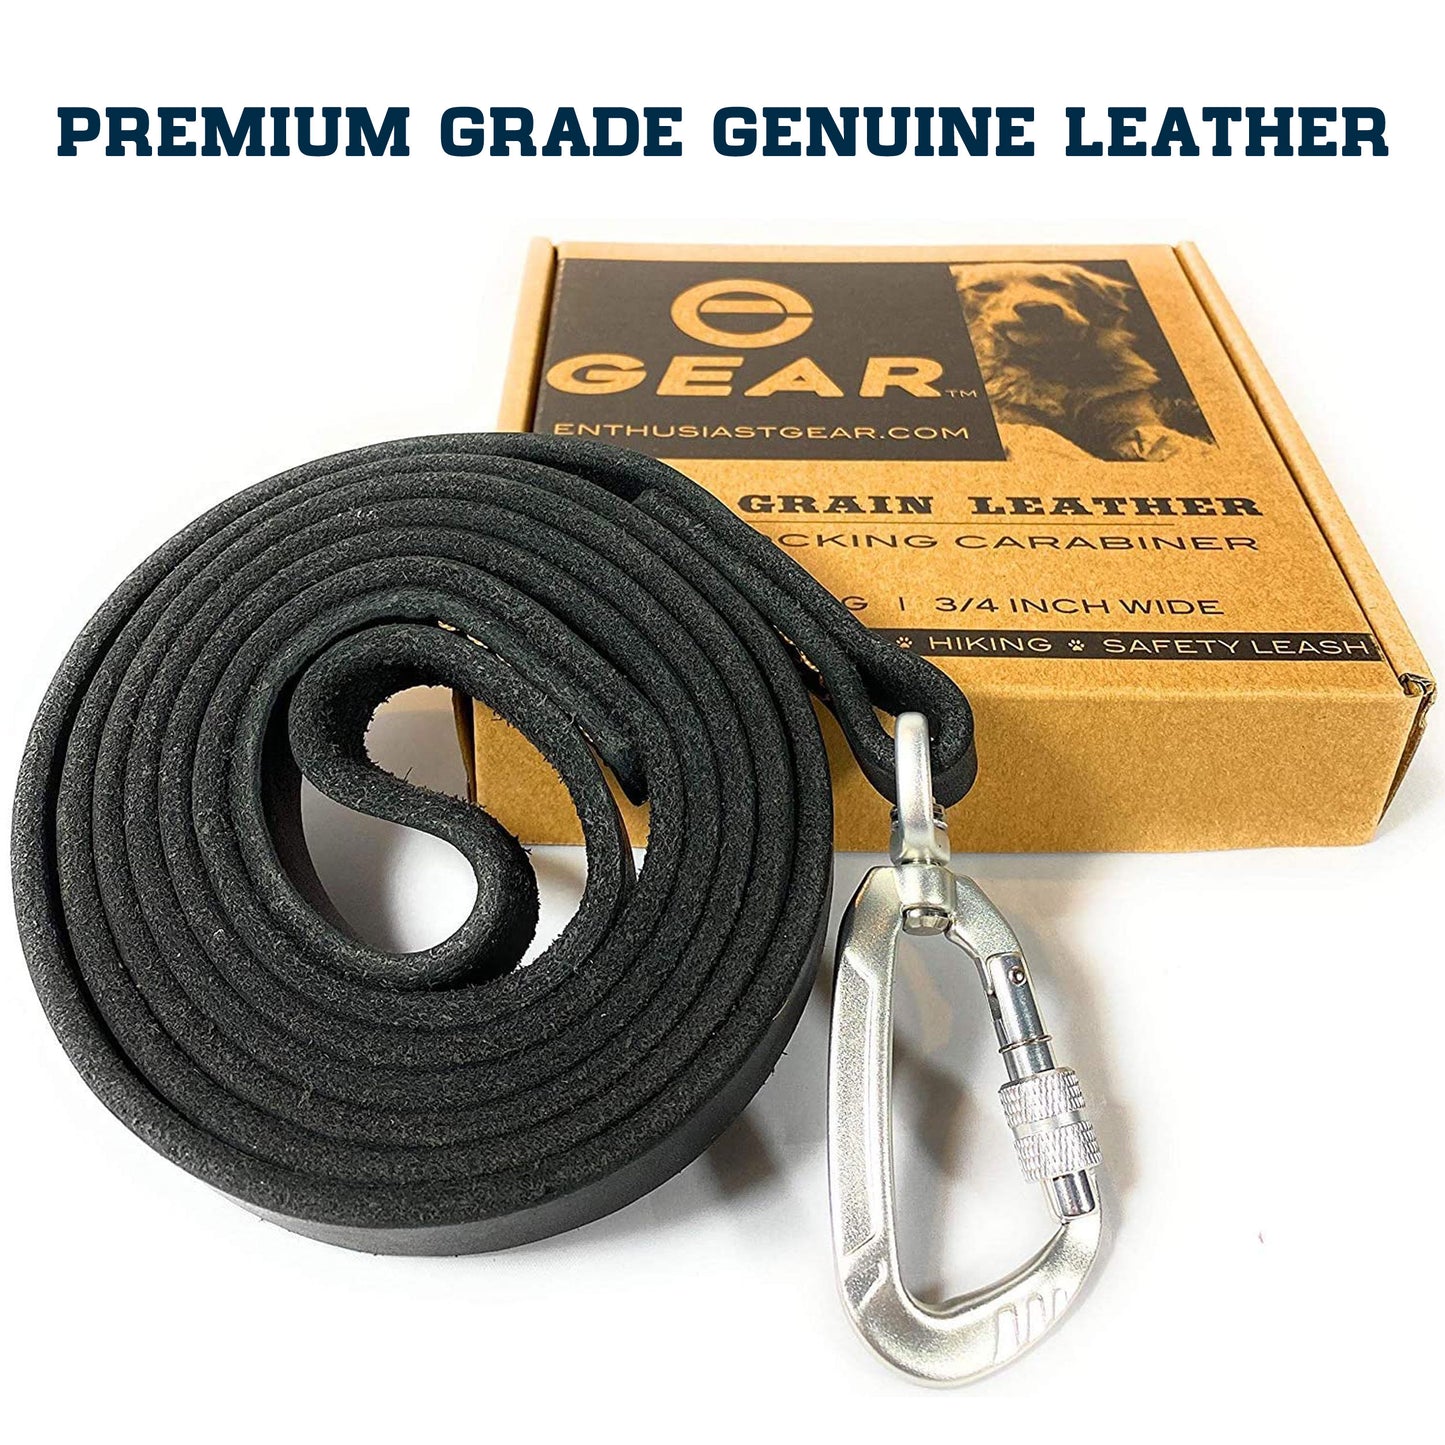 Enthusiast Gear Leather Dog Leash with Locking Carabiner | Strong and Soft Leash for Large and Medium Dogs | 6 Ft Long x ¾” Wide Genuine Leather